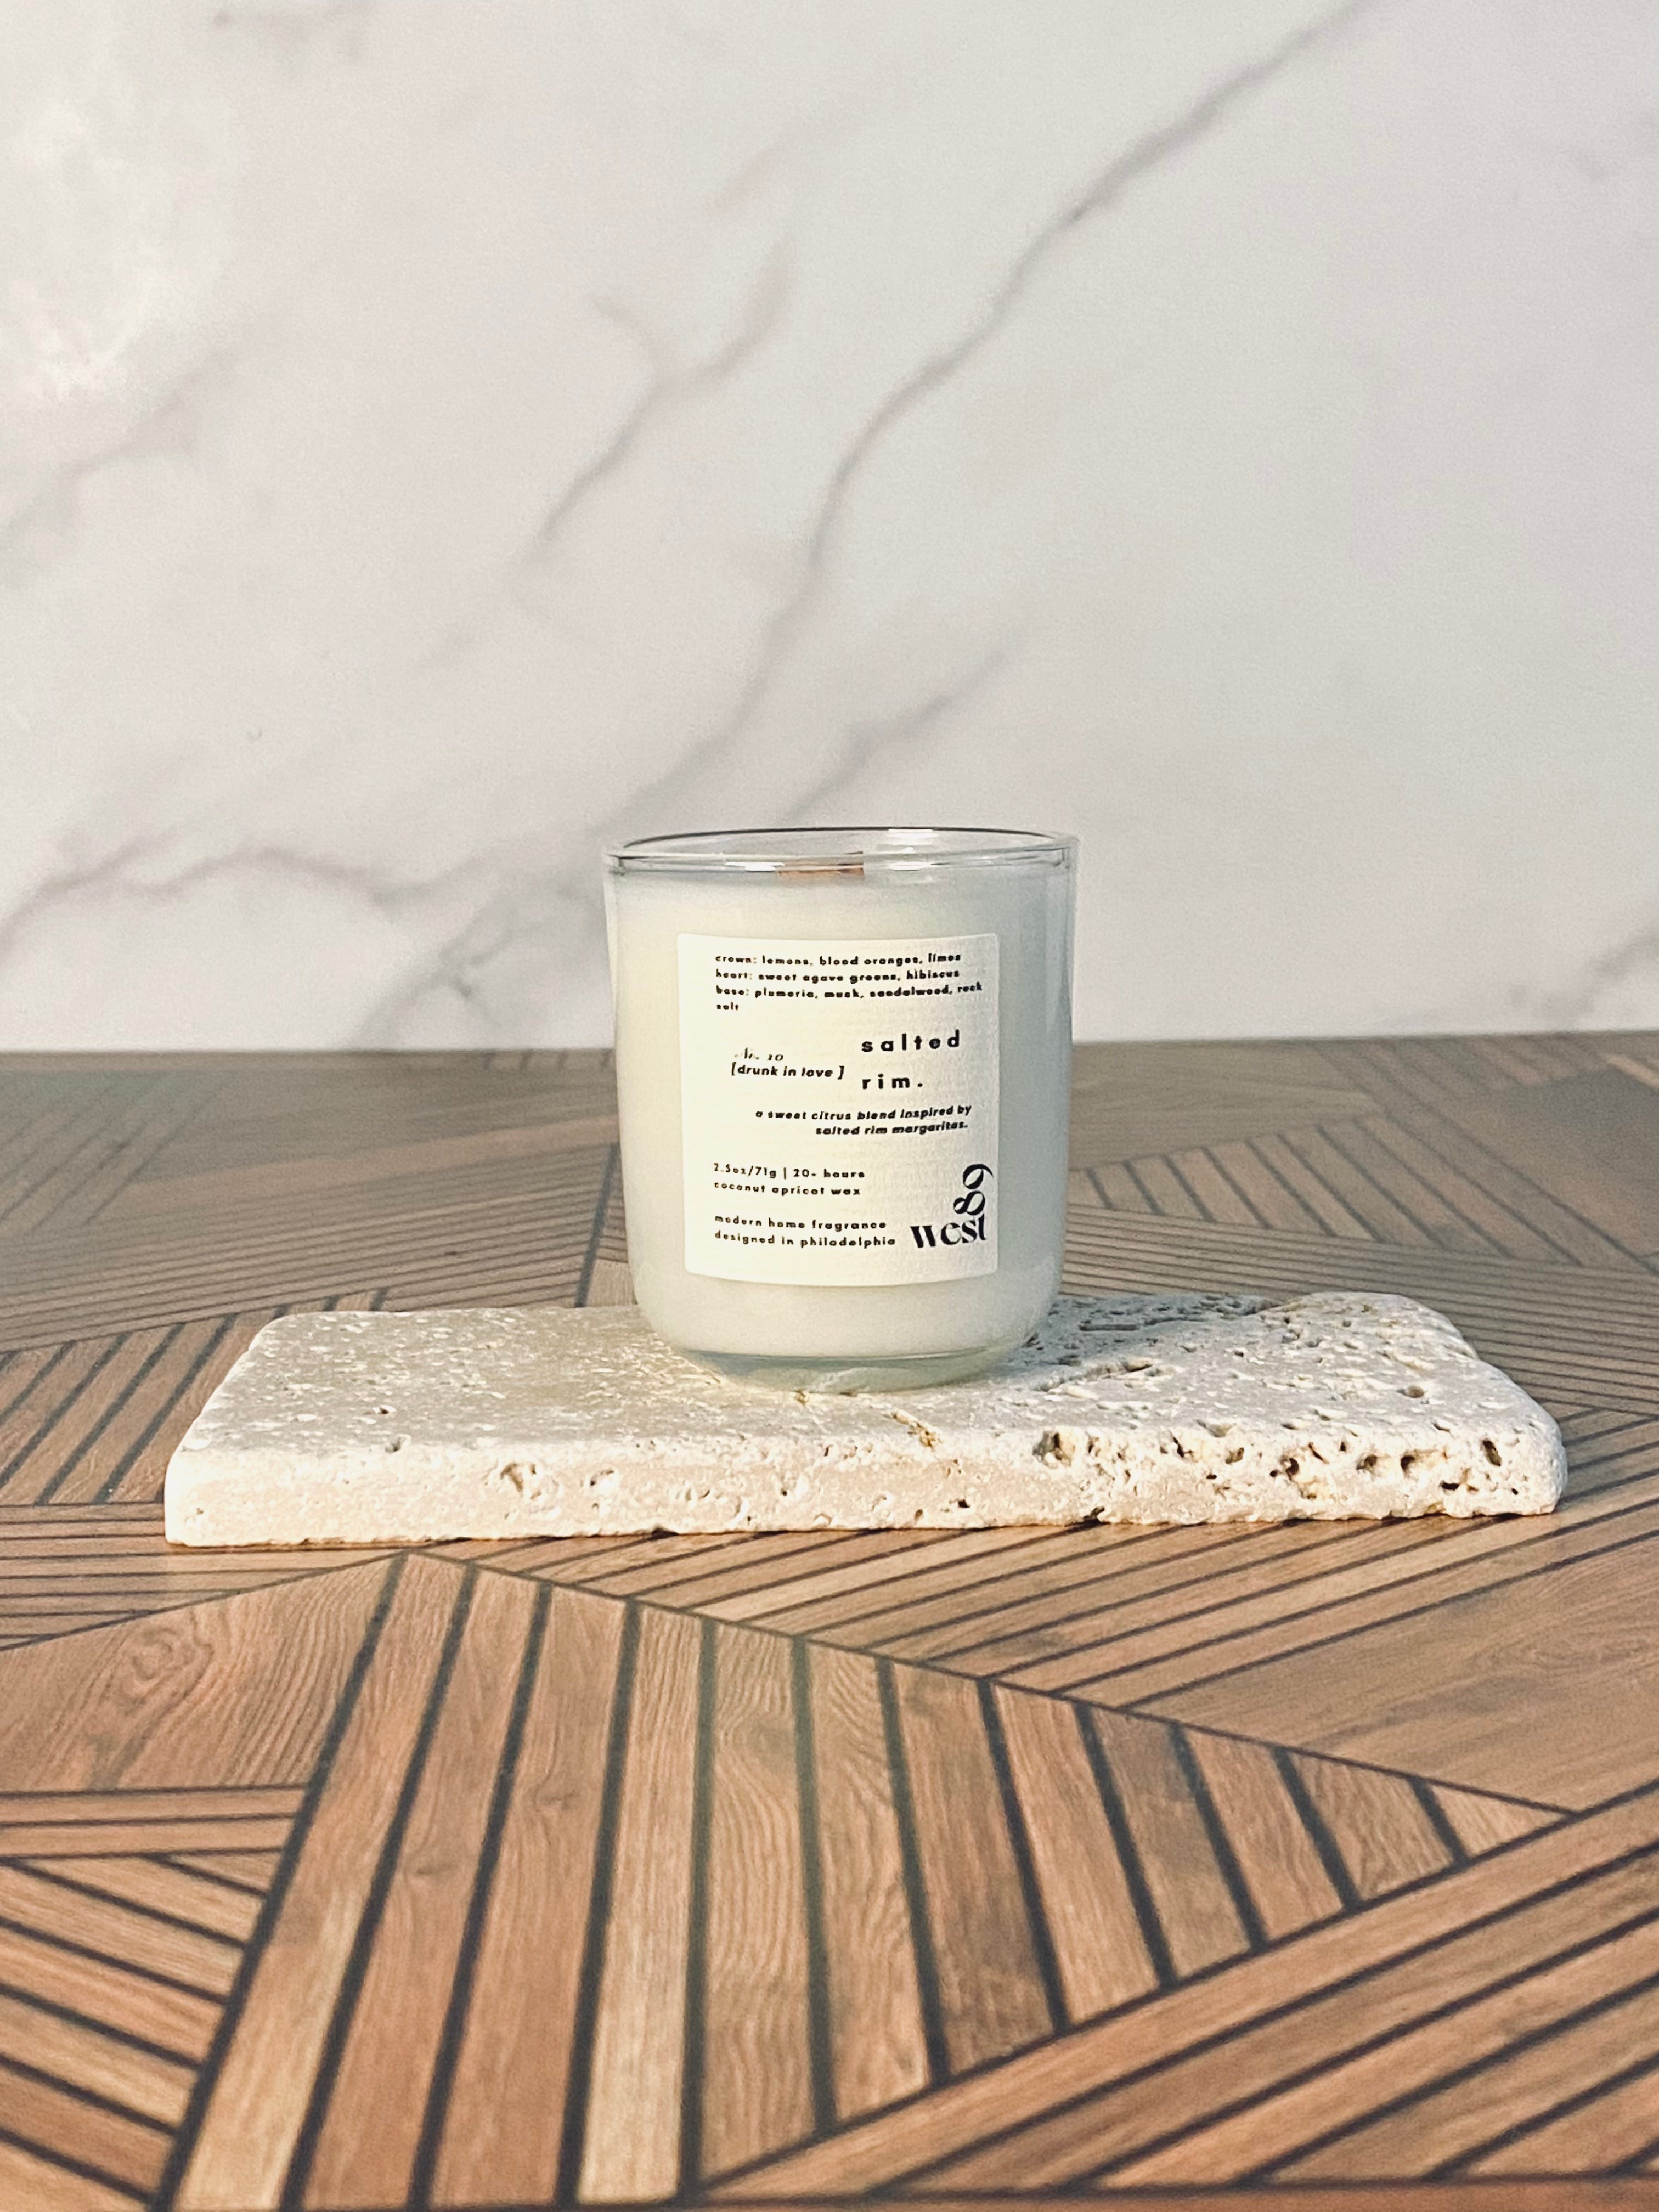 salted rim. | travel candle